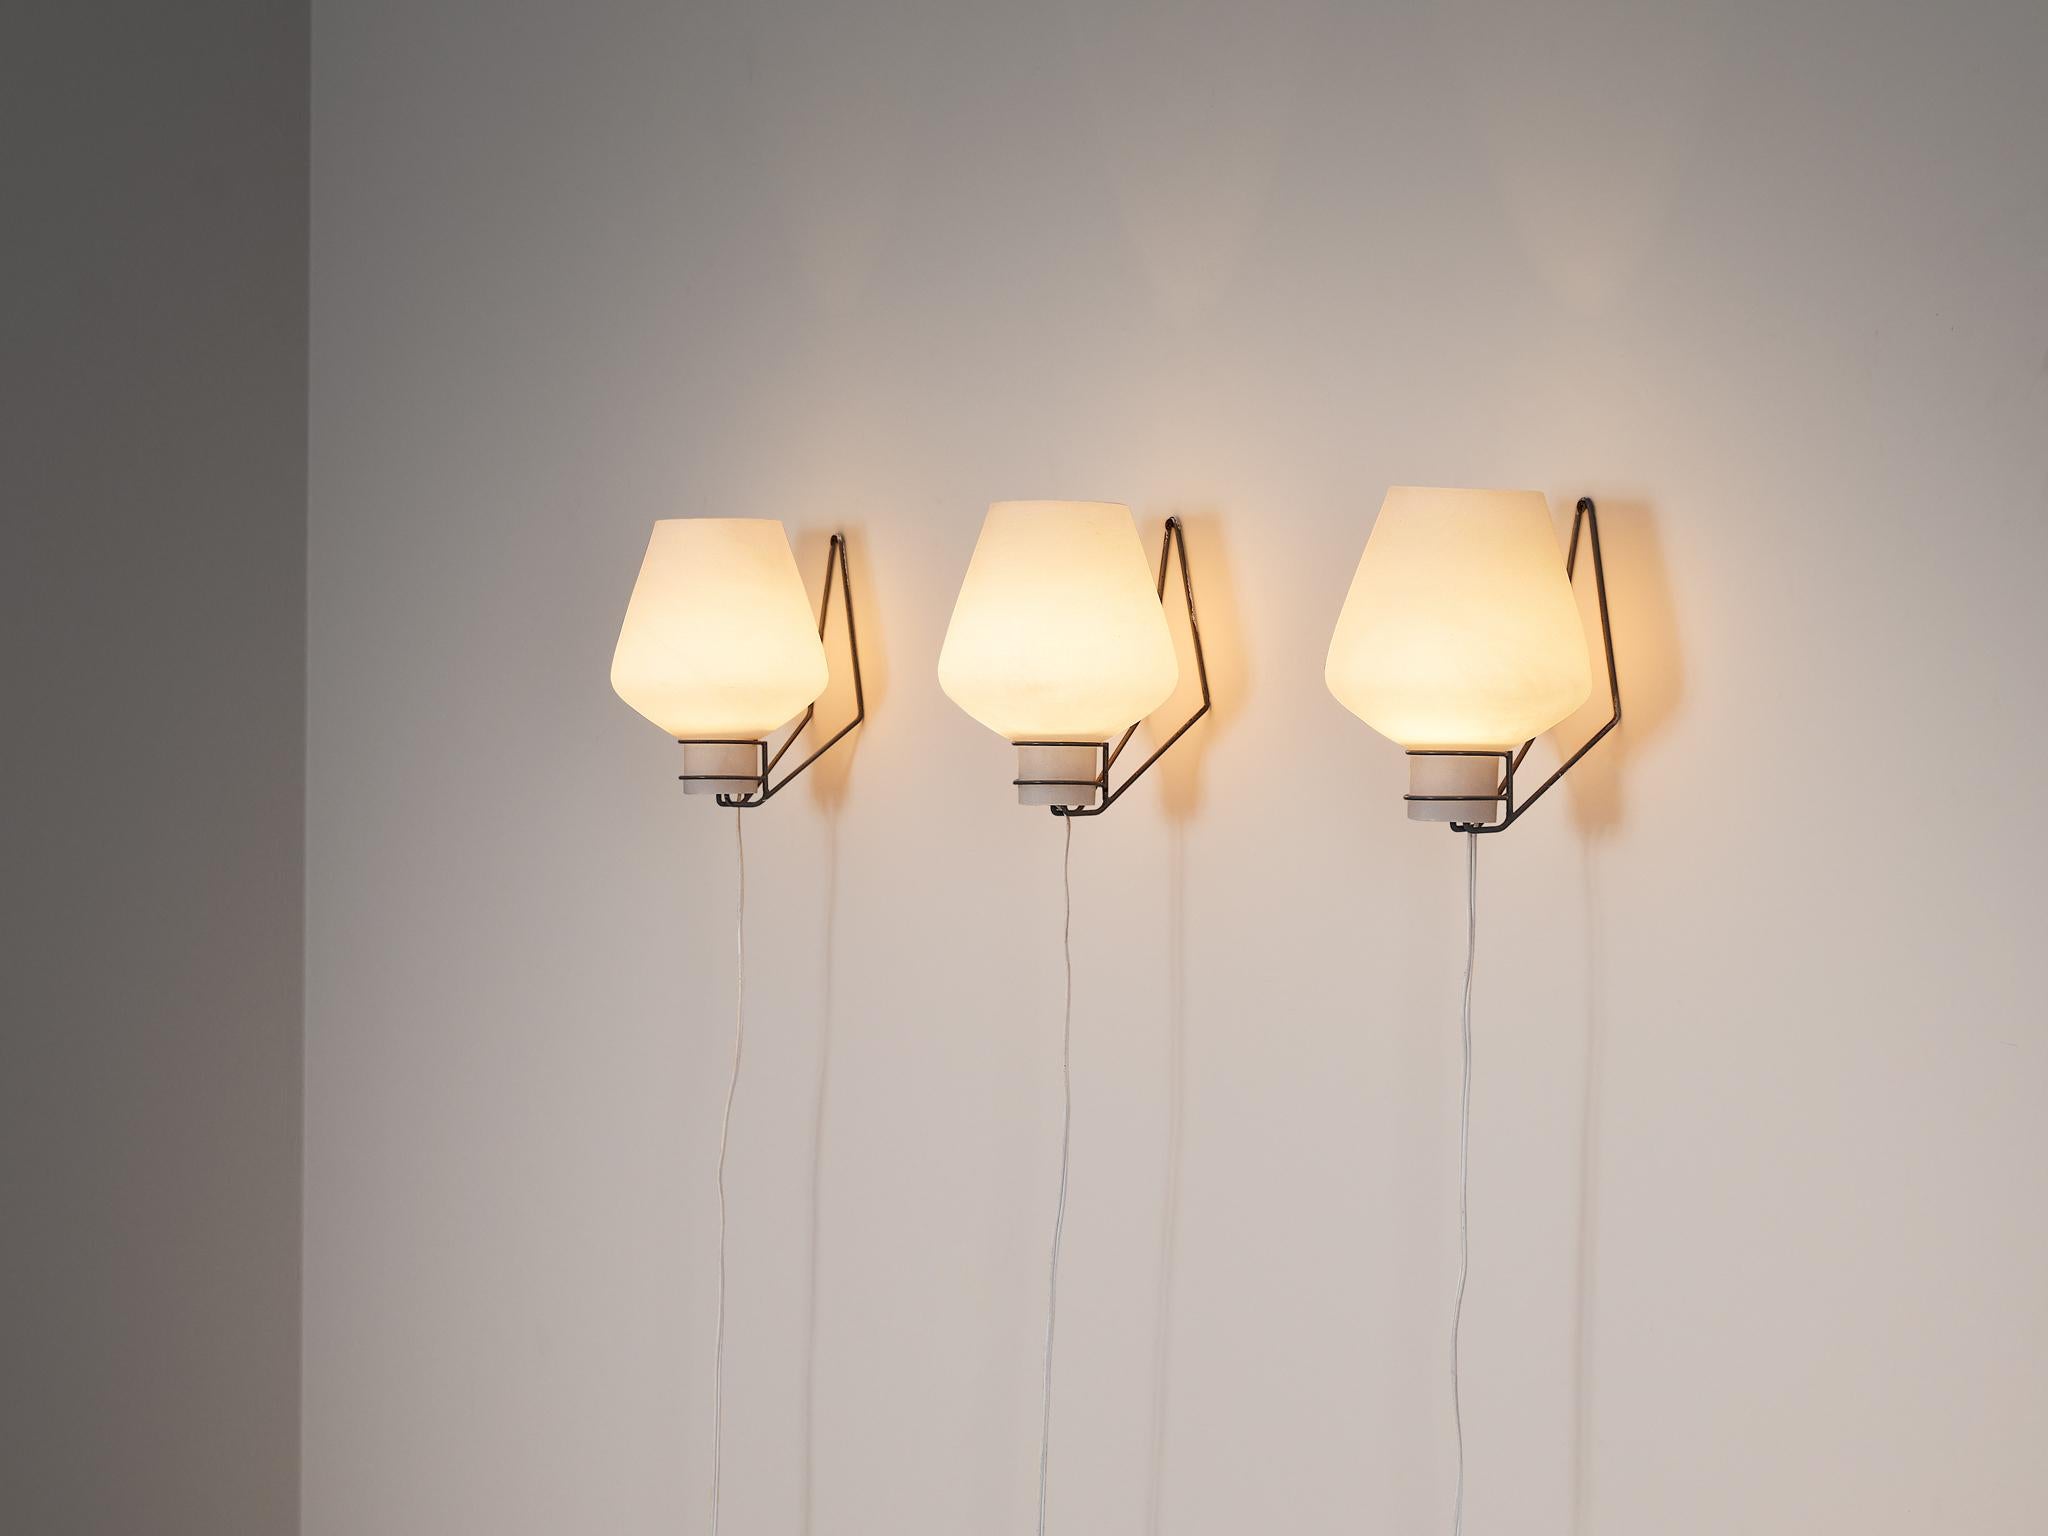 Wall lights, opaline glass, metal, The Netherlands, 1960s

These wall lights have a beautiful and minimalistic appearance. The way this lamp is mounted to the wall makes it very light and modern looking. The base of the opaline shade rests in the